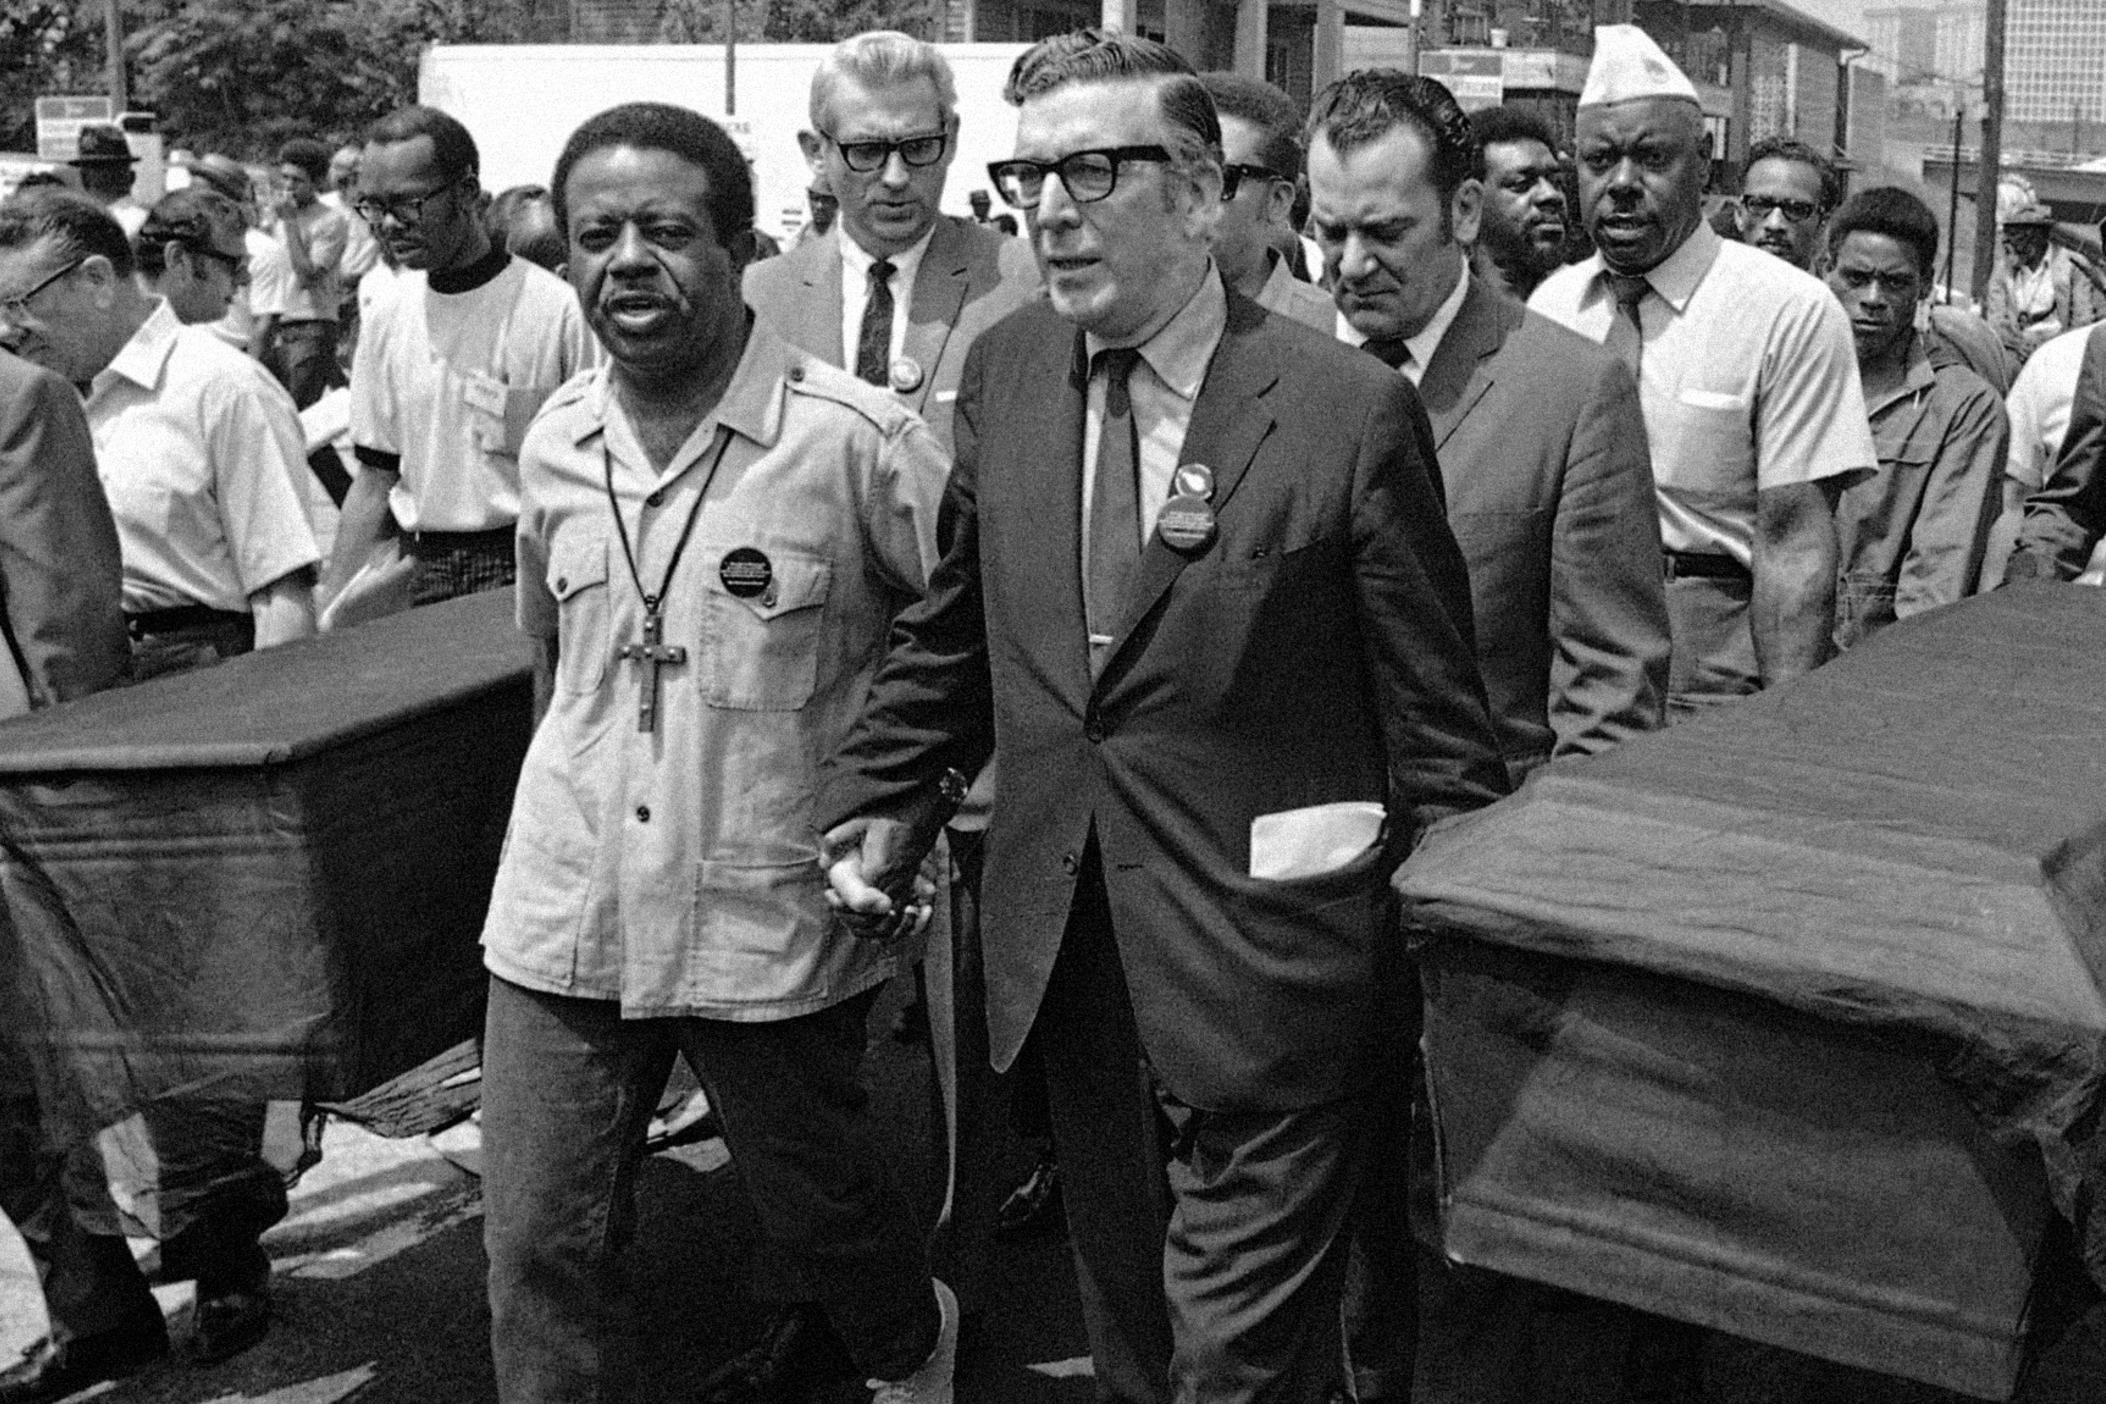 In this May 23, 1970 march in Atlanta, caskets are carried to protest the deaths of the six Black men shot in the back by police during the Augusta riot. Marchers also protested the deaths of students at Kent State University and Jackson State College. Pictured are Rev. Ralph Abernathy of the Southern Christian Leadership Conference (center left), and Leonard Woodcock of the UAW union (center right).